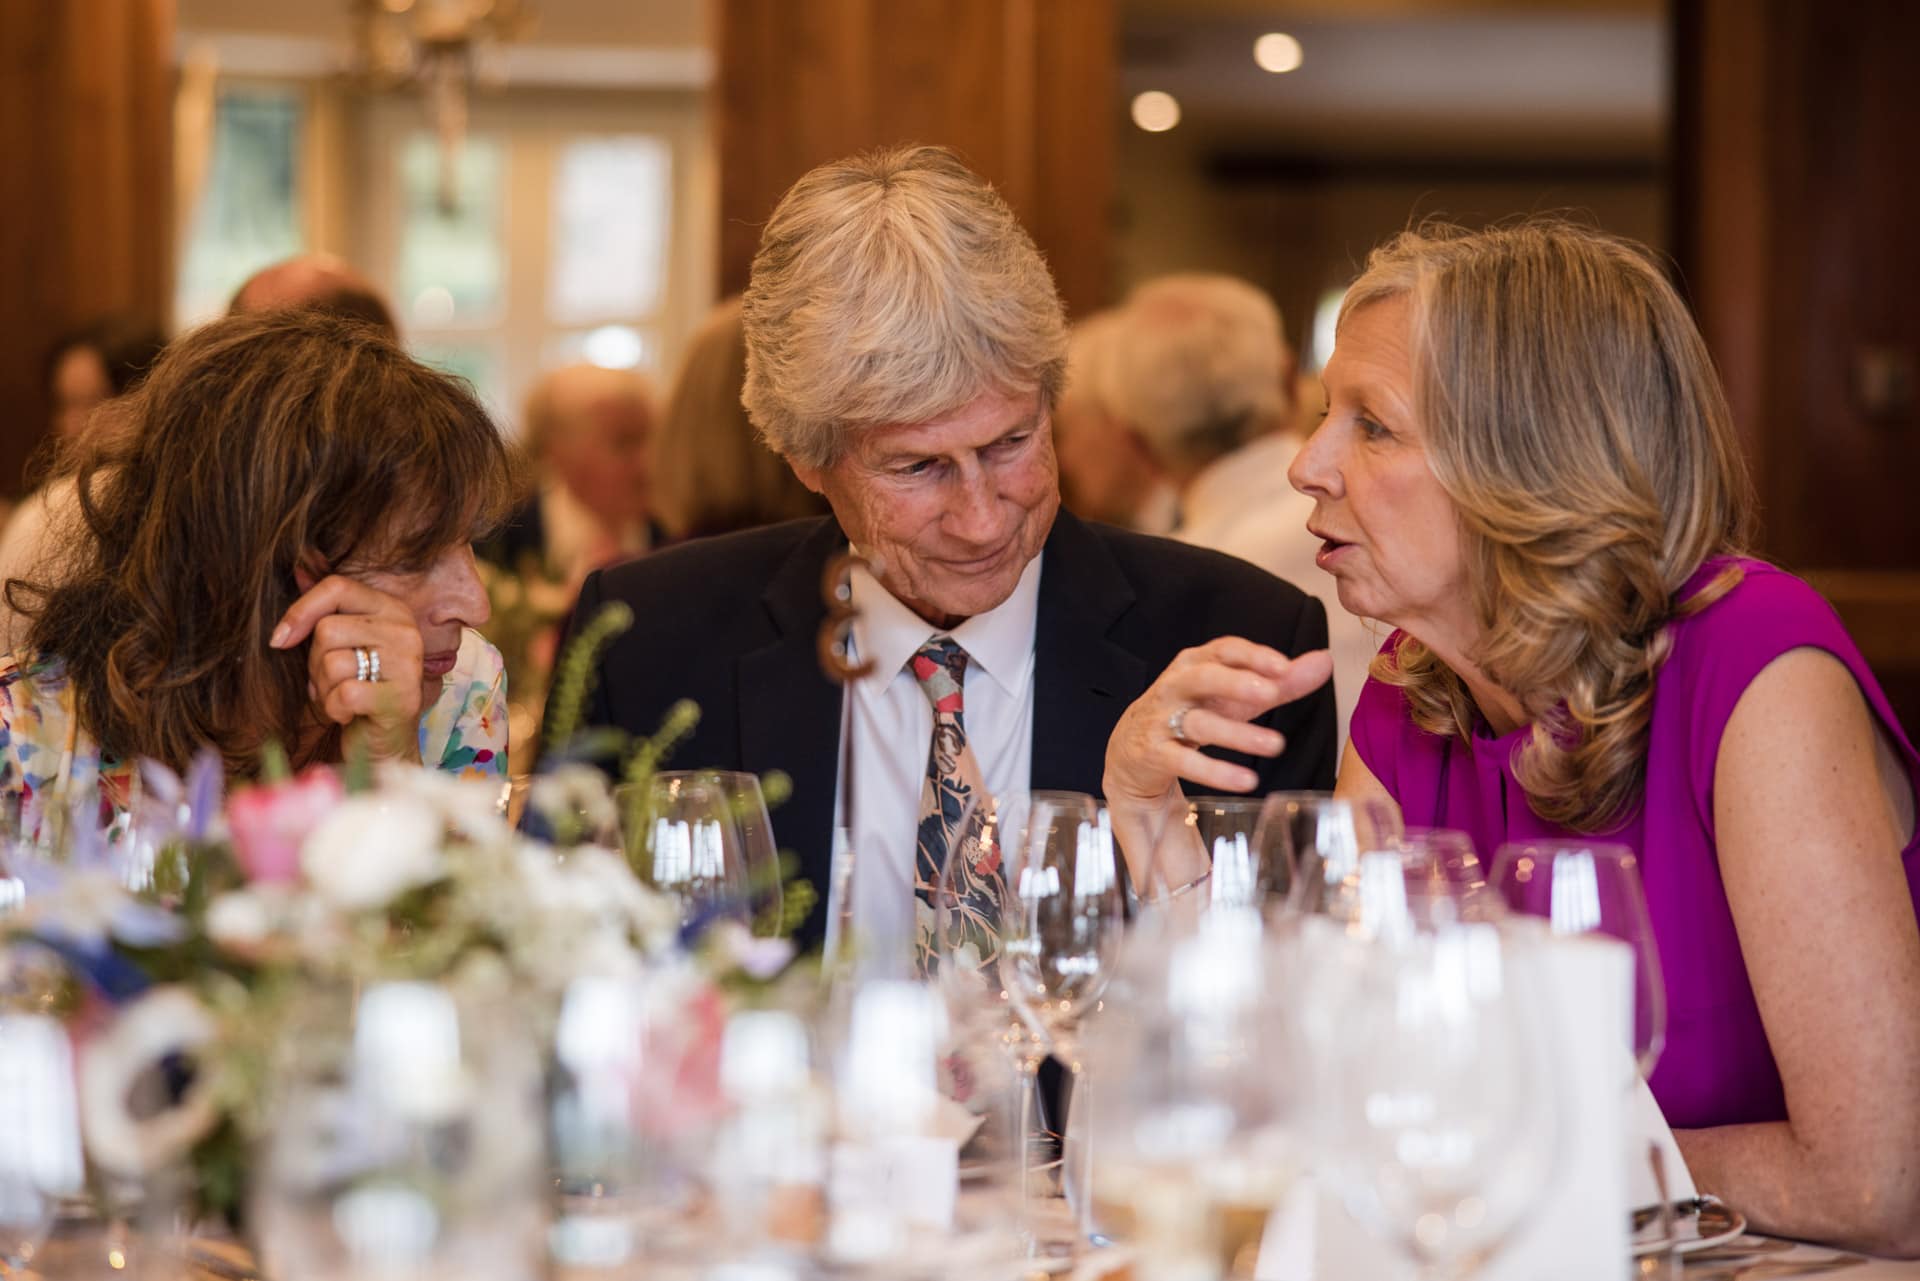 Two female guests chatting across a male guest at the wedding breakfast